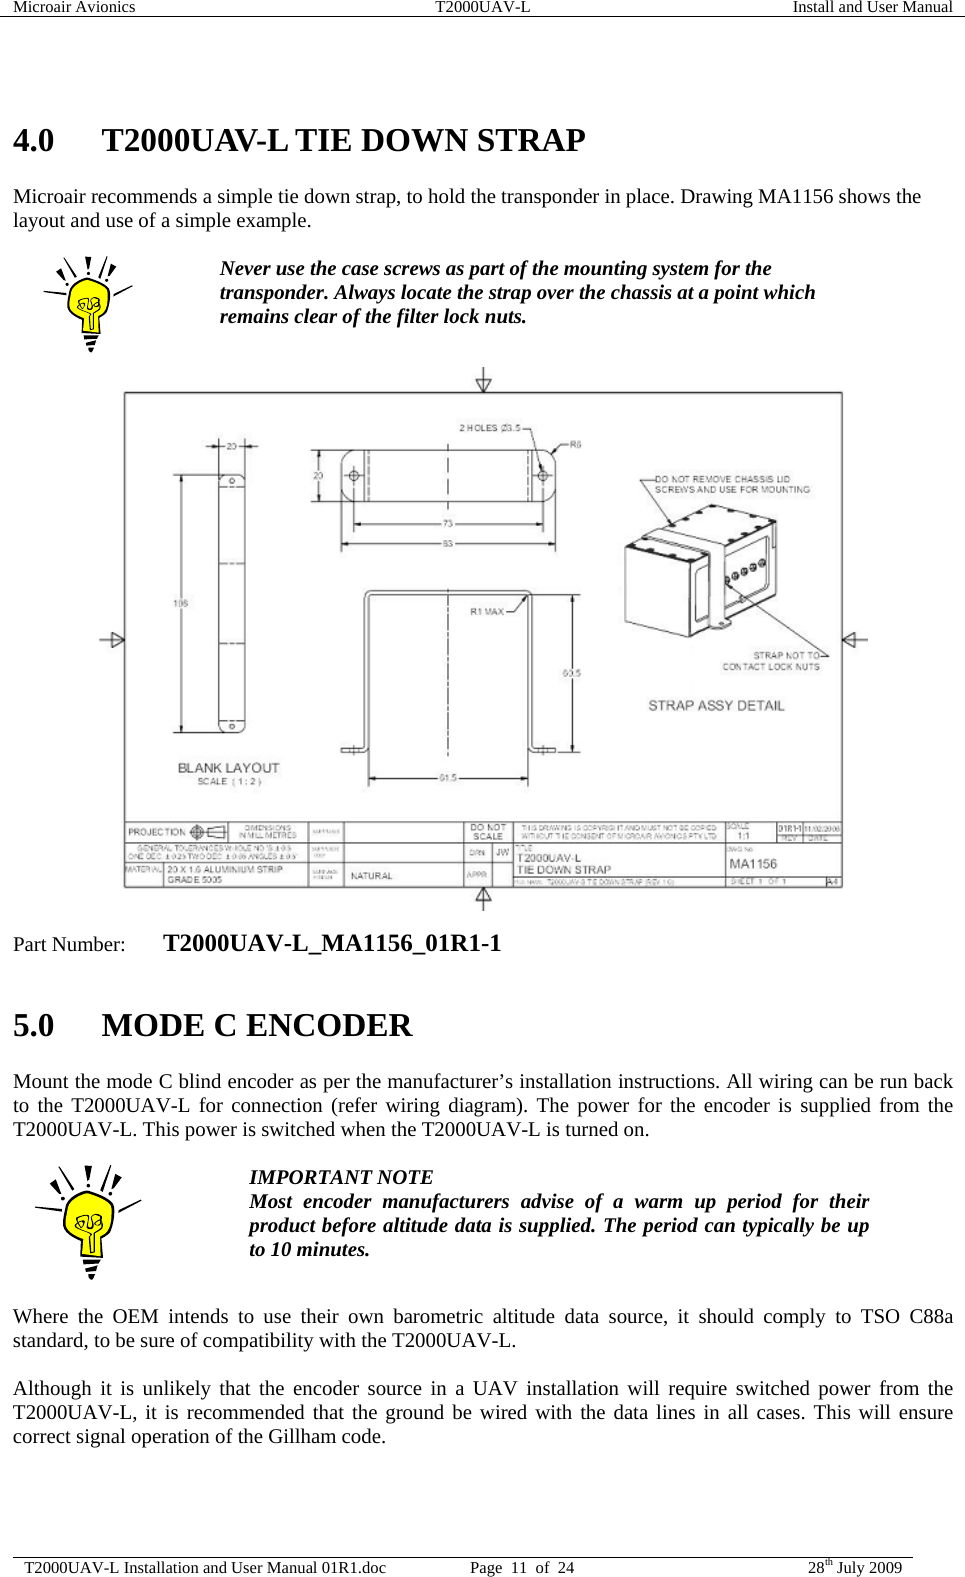 Microair Avionics  T2000UAV-L  Install and User Manual  T2000UAV-L Installation and User Manual 01R1.doc  Page  11  of  24  28th July 2009   4.0 T2000UAV-L TIE DOWN STRAP Microair recommends a simple tie down strap, to hold the transponder in place. Drawing MA1156 shows the layout and use of a simple example.   Never use the case screws as part of the mounting system for the transponder. Always locate the strap over the chassis at a point which remains clear of the filter lock nuts.                         Part Number:  T2000UAV-L_MA1156_01R1-1  5.0 MODE C ENCODER Mount the mode C blind encoder as per the manufacturer’s installation instructions. All wiring can be run back to the T2000UAV-L for connection (refer wiring diagram). The power for the encoder is supplied from the T2000UAV-L. This power is switched when the T2000UAV-L is turned on.   IMPORTANT NOTE Most encoder manufacturers advise of a warm up period for their product before altitude data is supplied. The period can typically be up to 10 minutes.  Where the OEM intends to use their own barometric altitude data source, it should comply to TSO C88a standard, to be sure of compatibility with the T2000UAV-L.  Although it is unlikely that the encoder source in a UAV installation will require switched power from the T2000UAV-L, it is recommended that the ground be wired with the data lines in all cases. This will ensure correct signal operation of the Gillham code.   